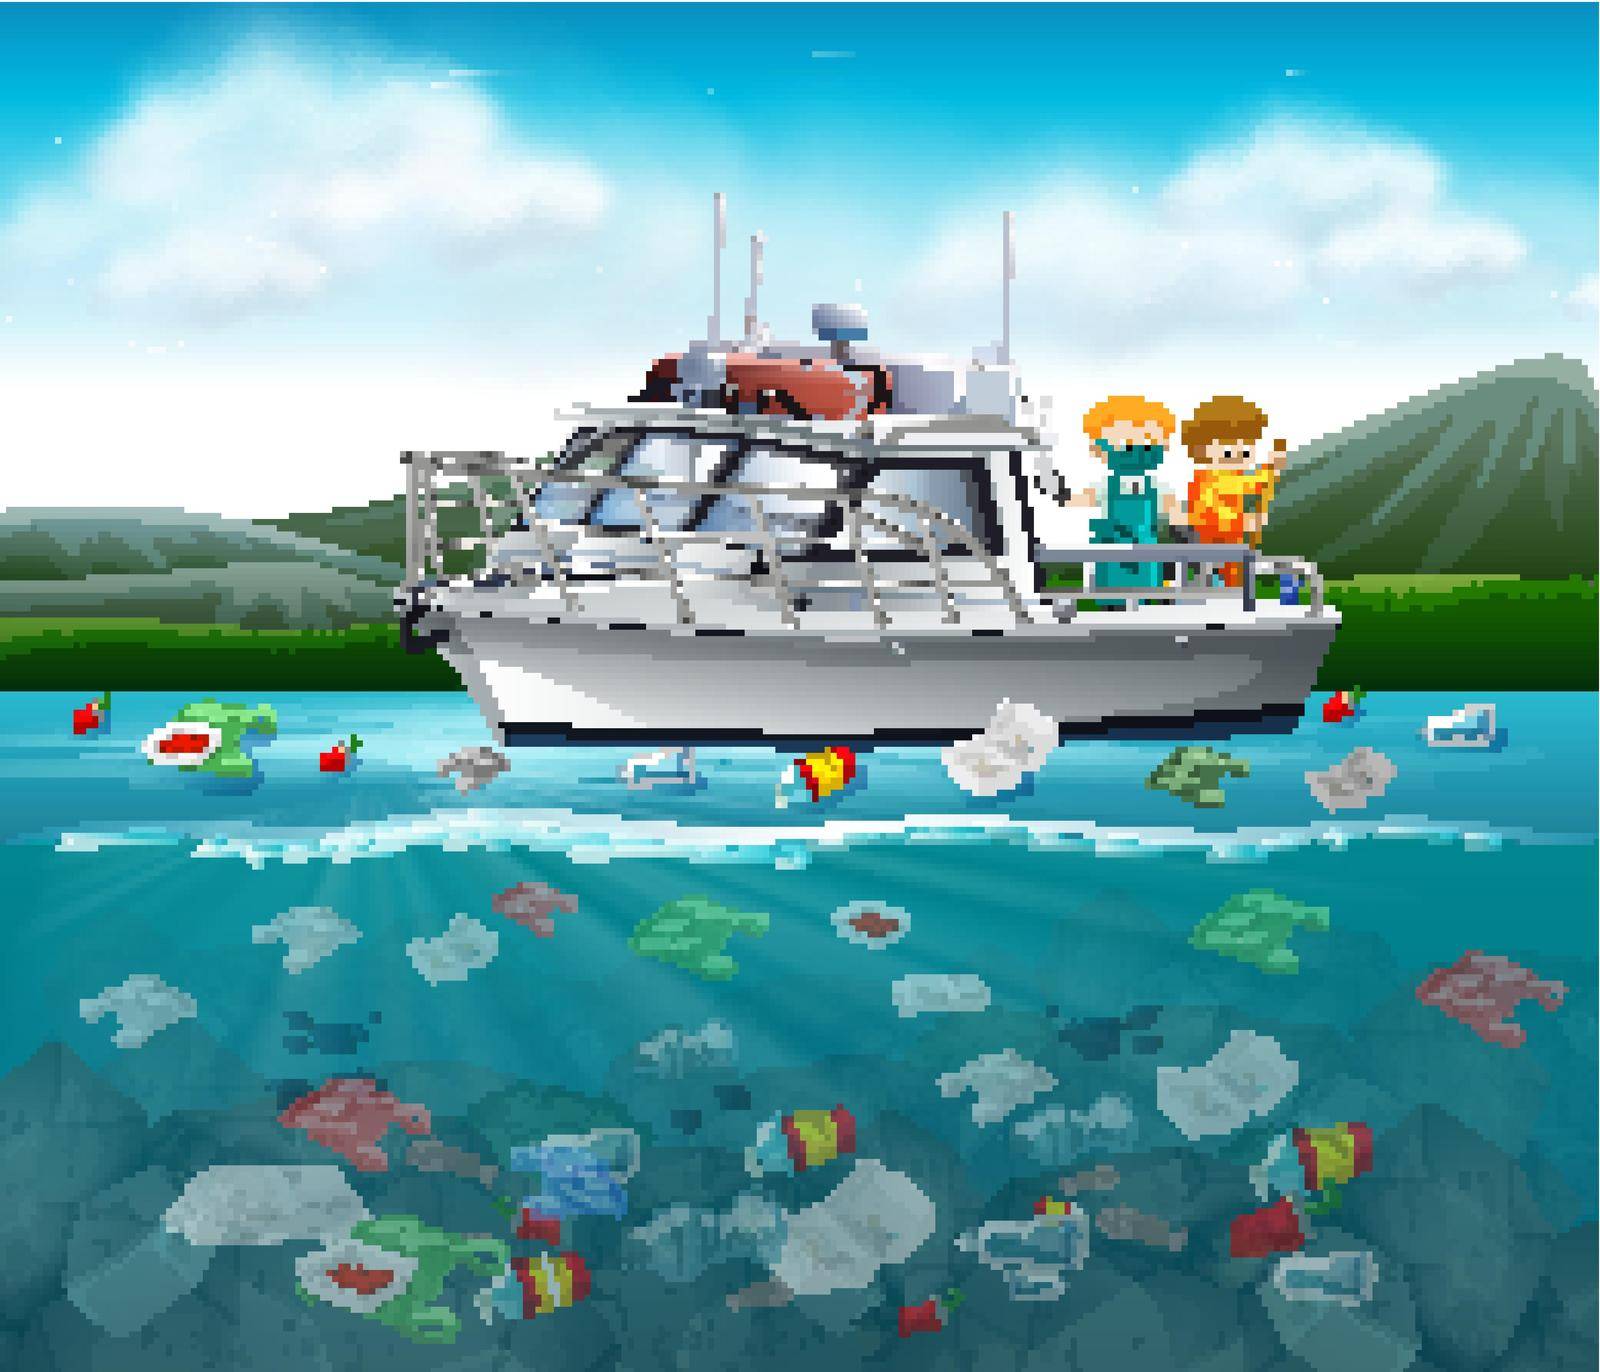 Water pollution with plastic bags in ocean illustration